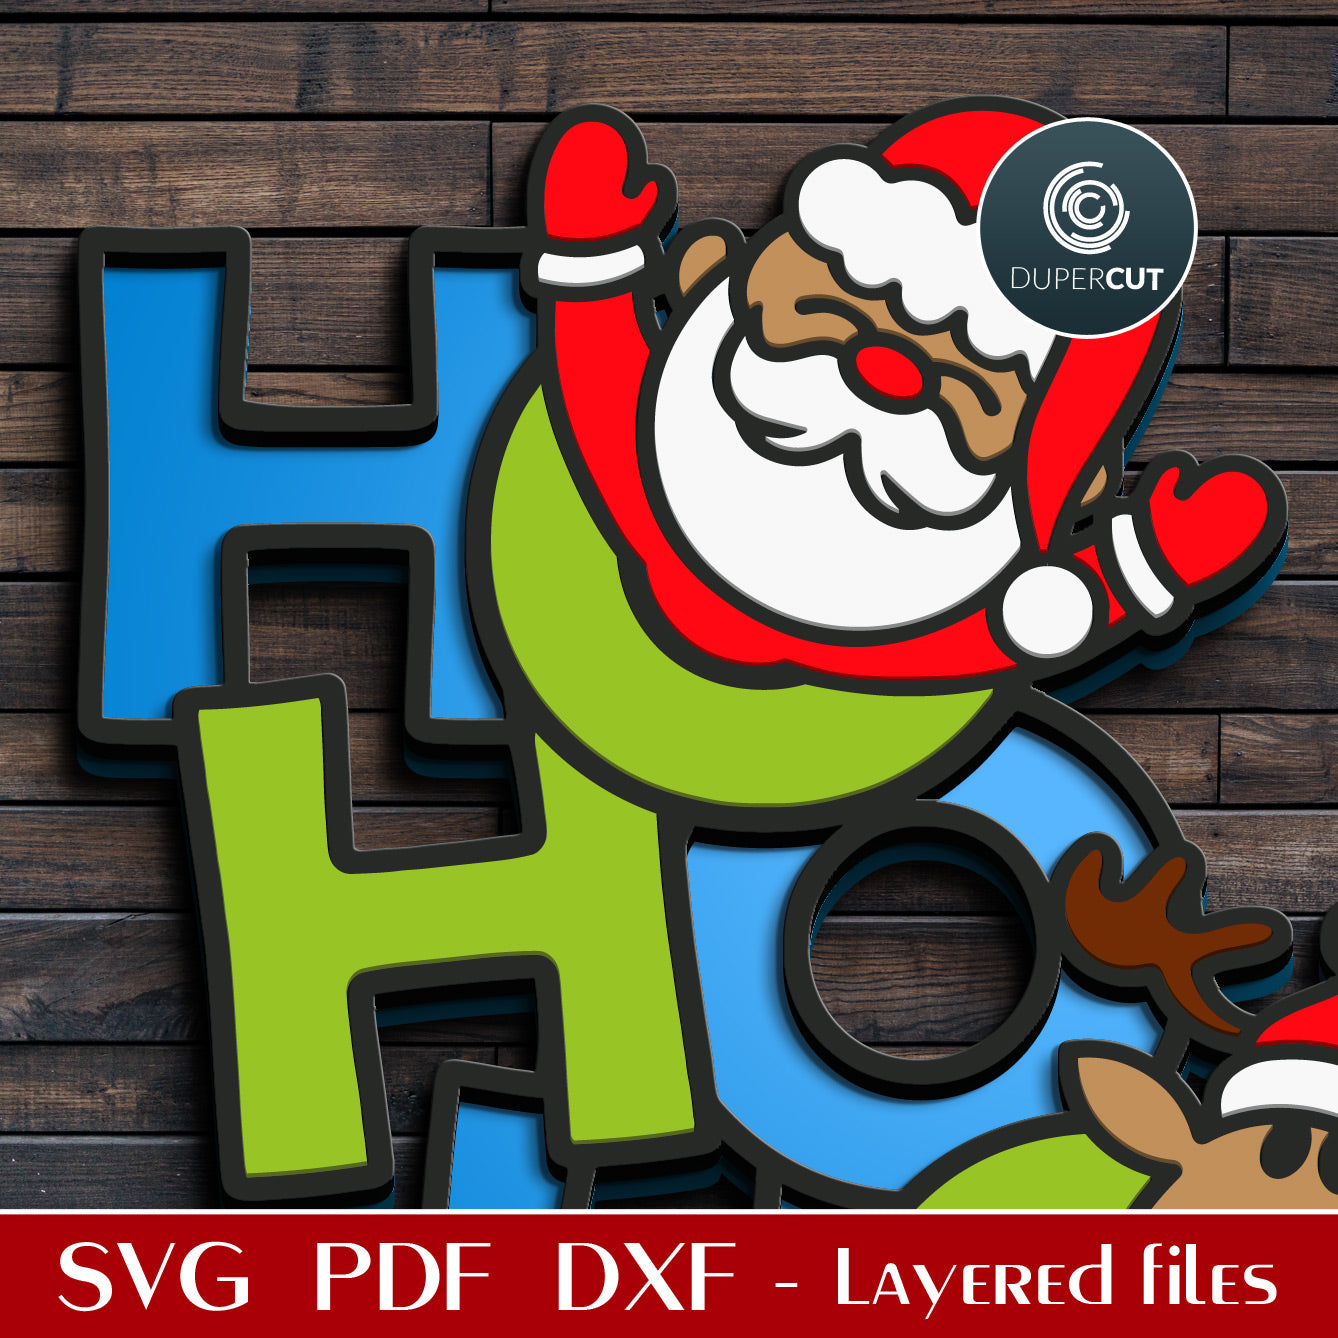 Santa holidays door hanger sign HO-HO-HO - SVG DXF layered vector files for laser cutting with Glowforge, Cricut, Silhouette Cameo, CNC plasma by DuperCut